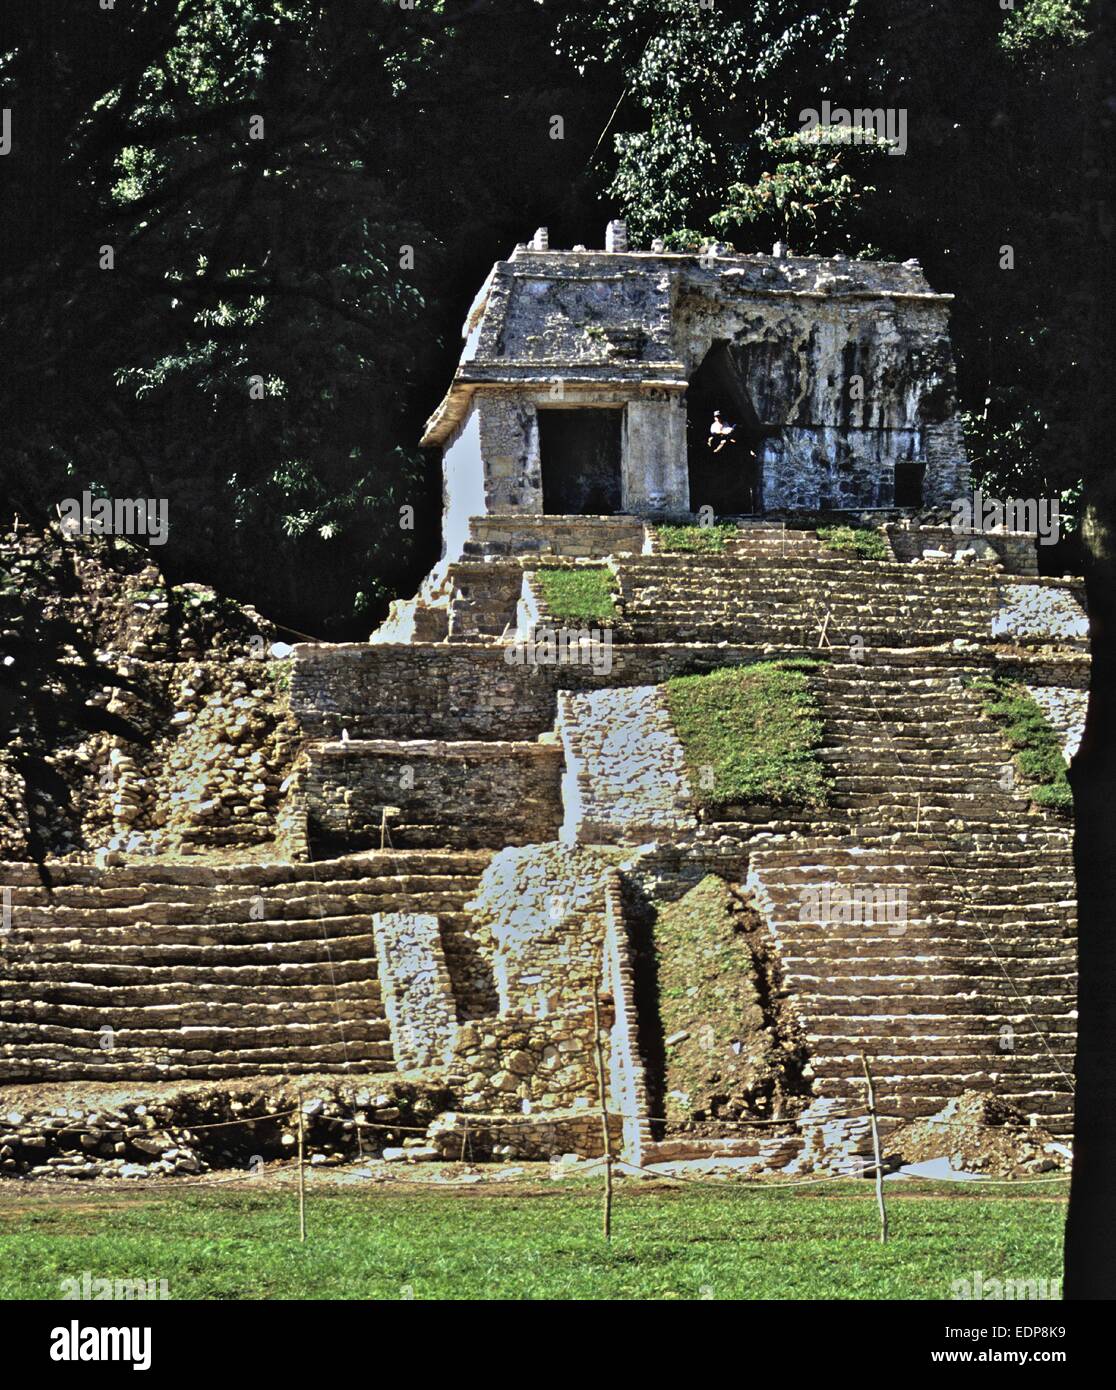 Mexico - Maya ruins at Palenque - one of the biggest and best archaeological sites in Mexico Temple XVII Stock Photo